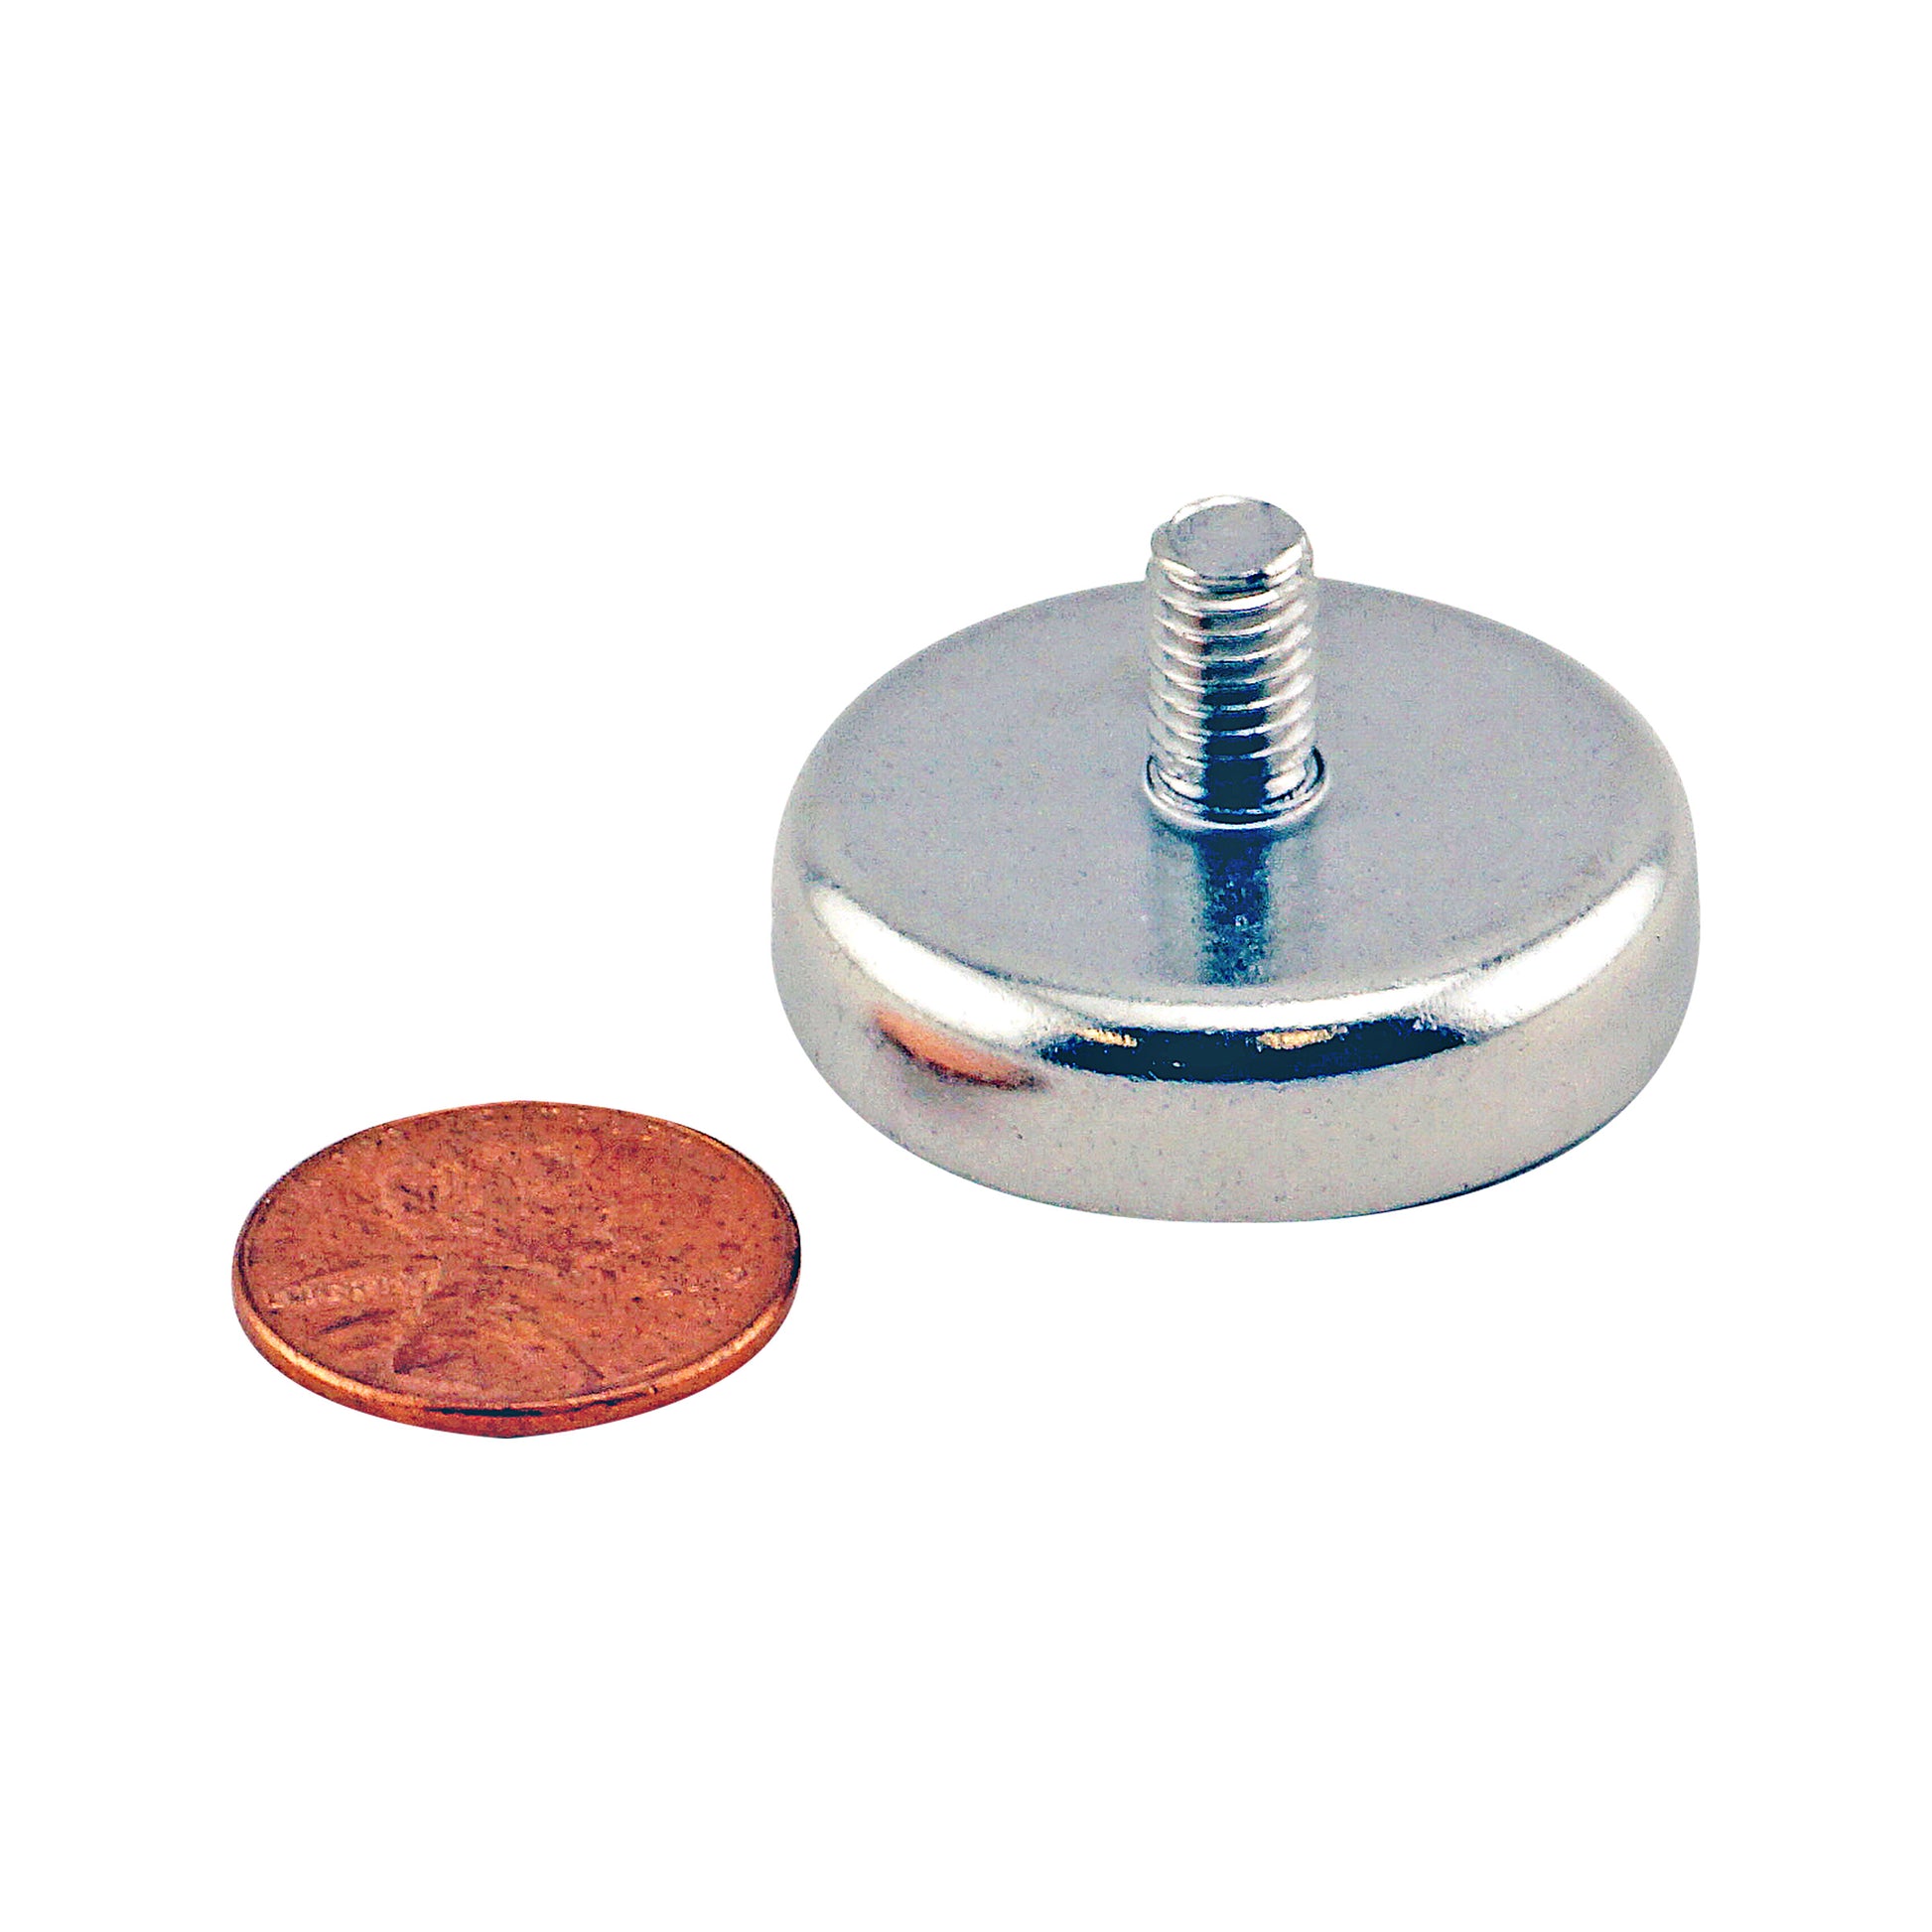 Load image into Gallery viewer, CACM126S01 Ceramic Round Base Magnet with Male Thread - Compared to Penny for Size Reference